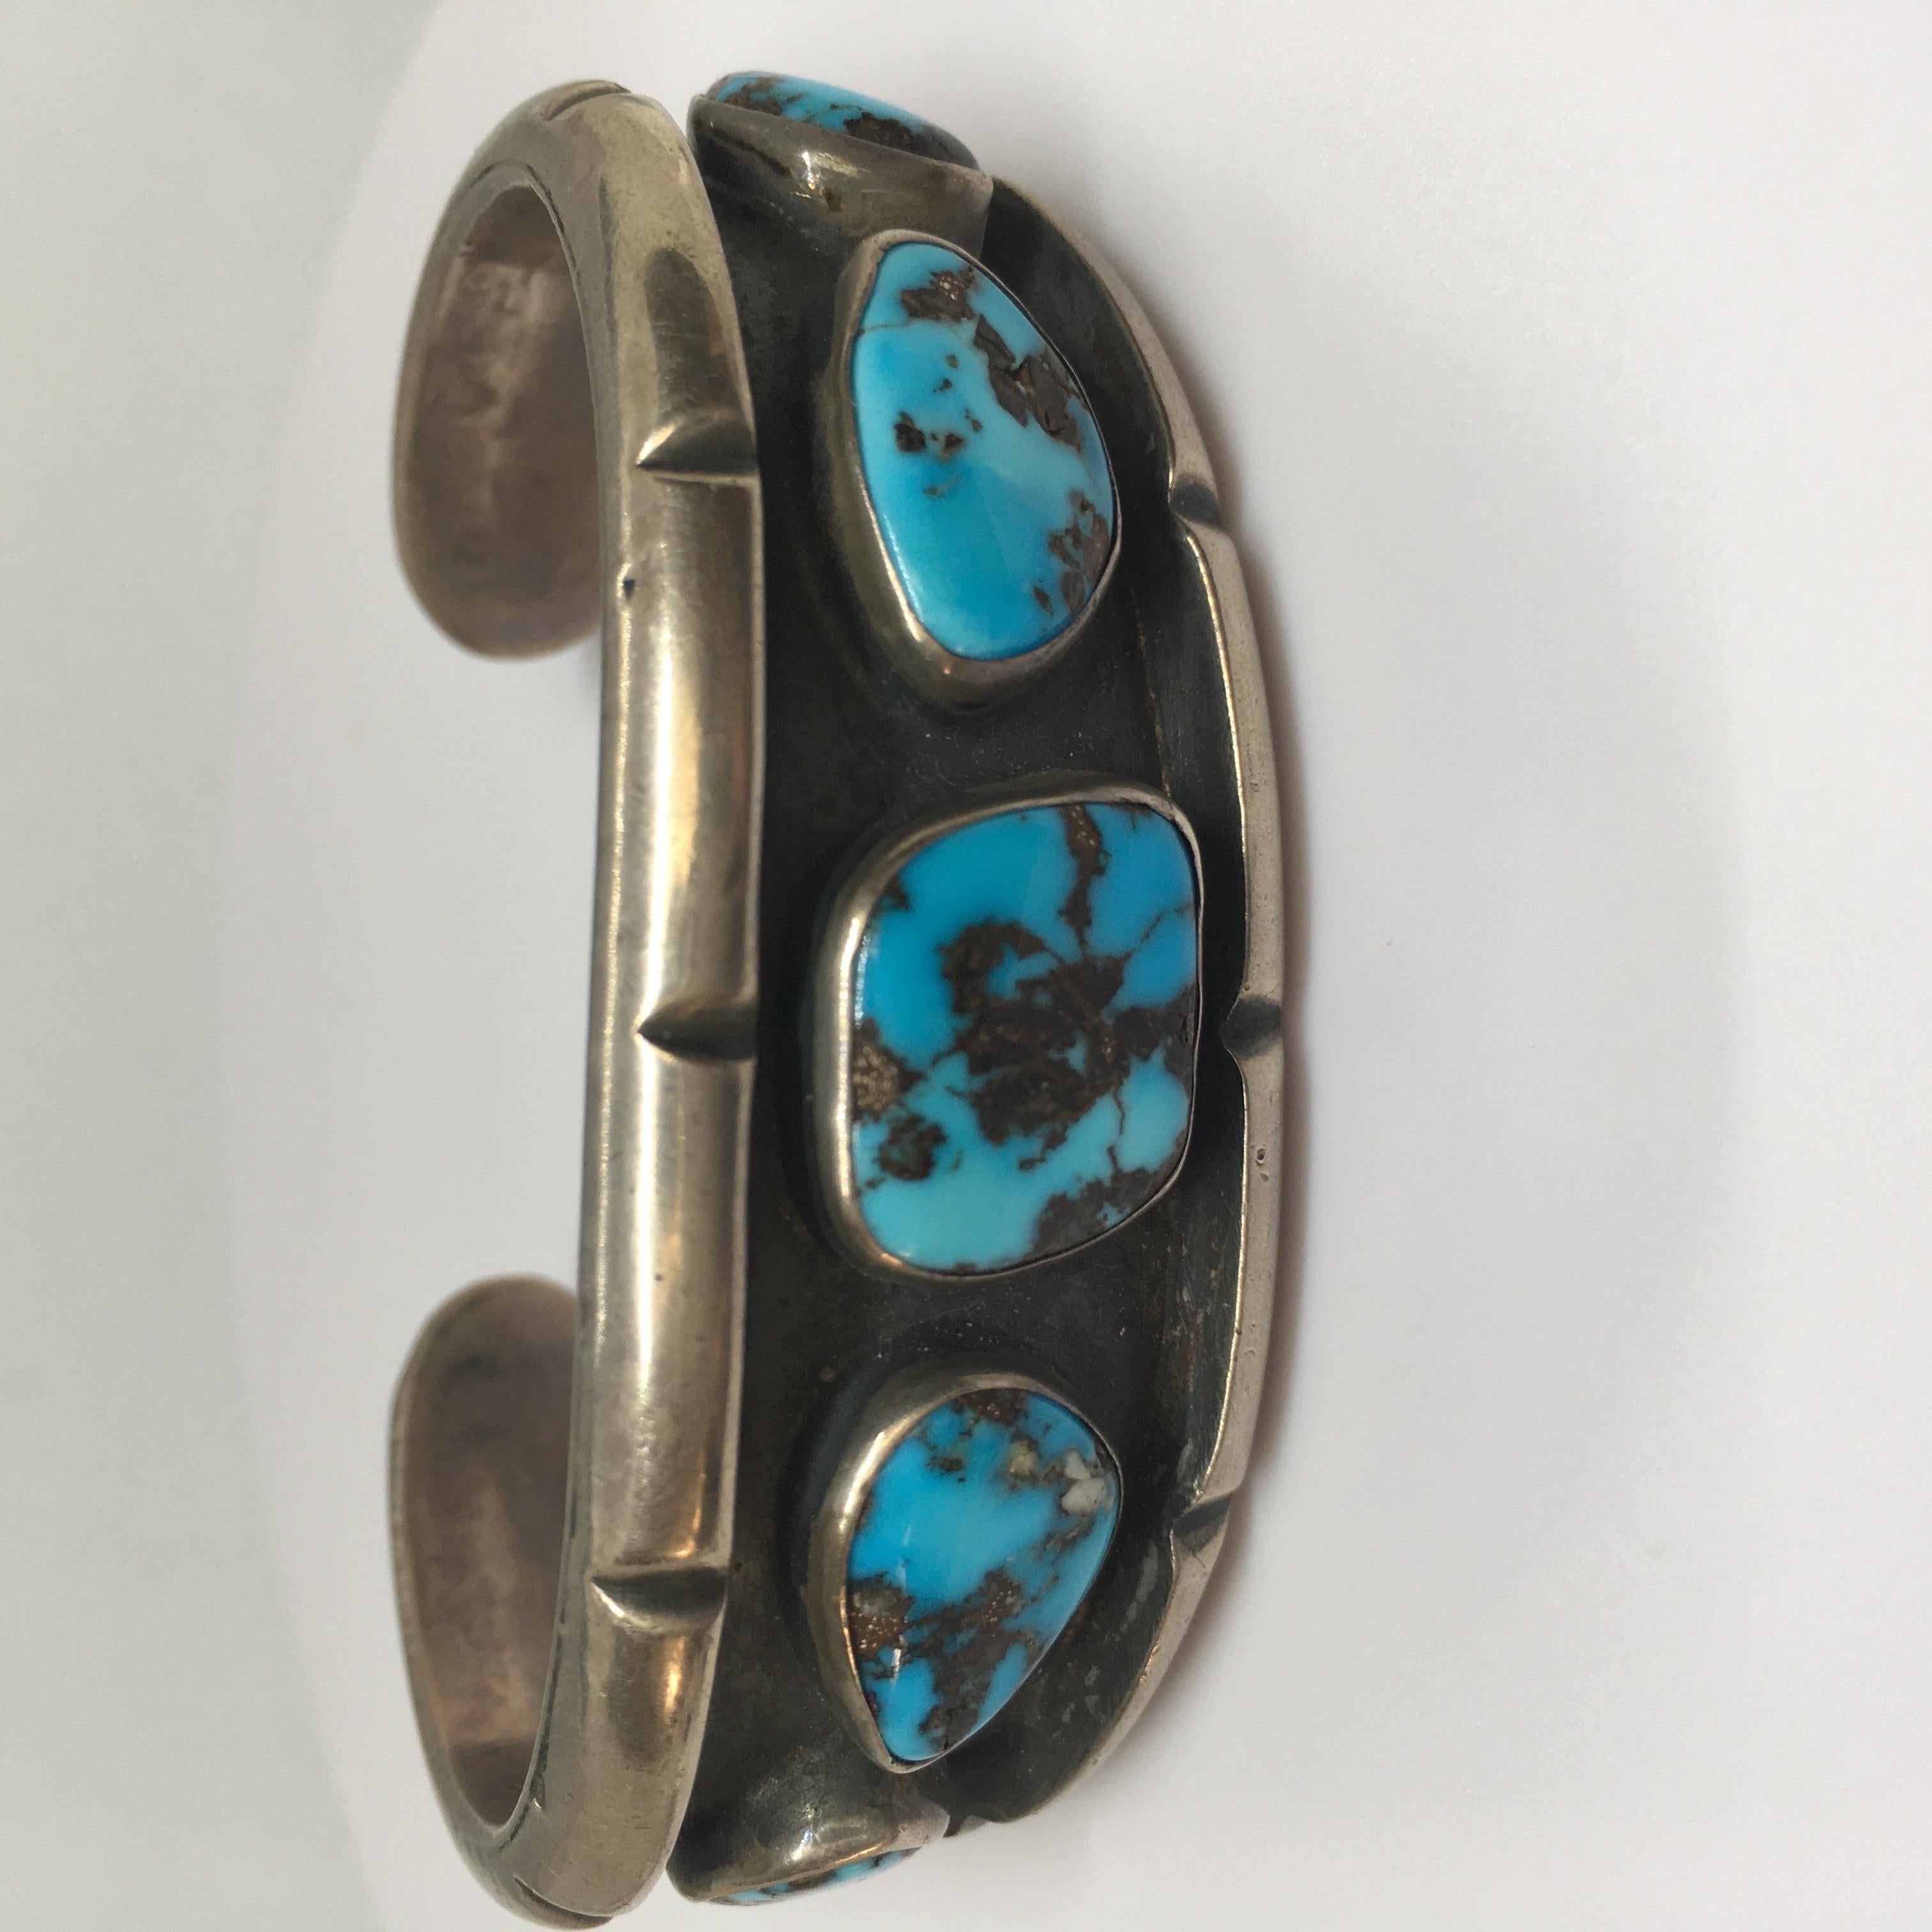 Women's or Men's Native American Indian Silver & Turquoise Cuff Bracelet Old Pawn Navajo Vintage